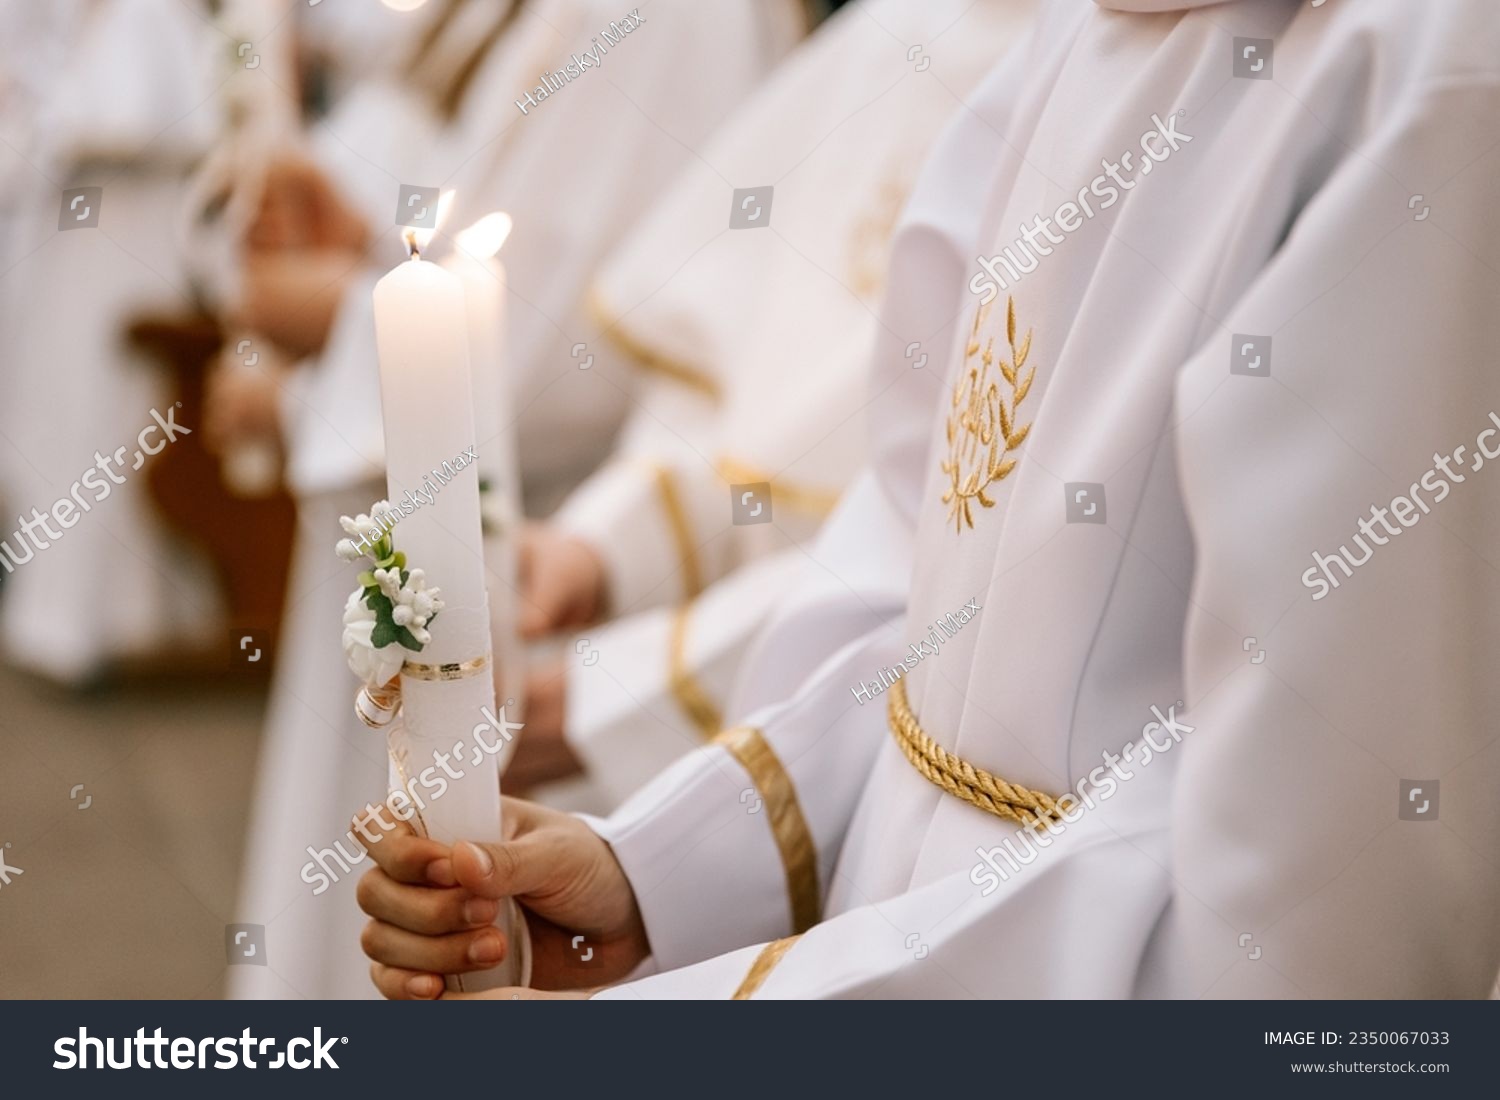 photo of children's hands receiving their first communion in a Catholic church, the priest blesses them #2350067033